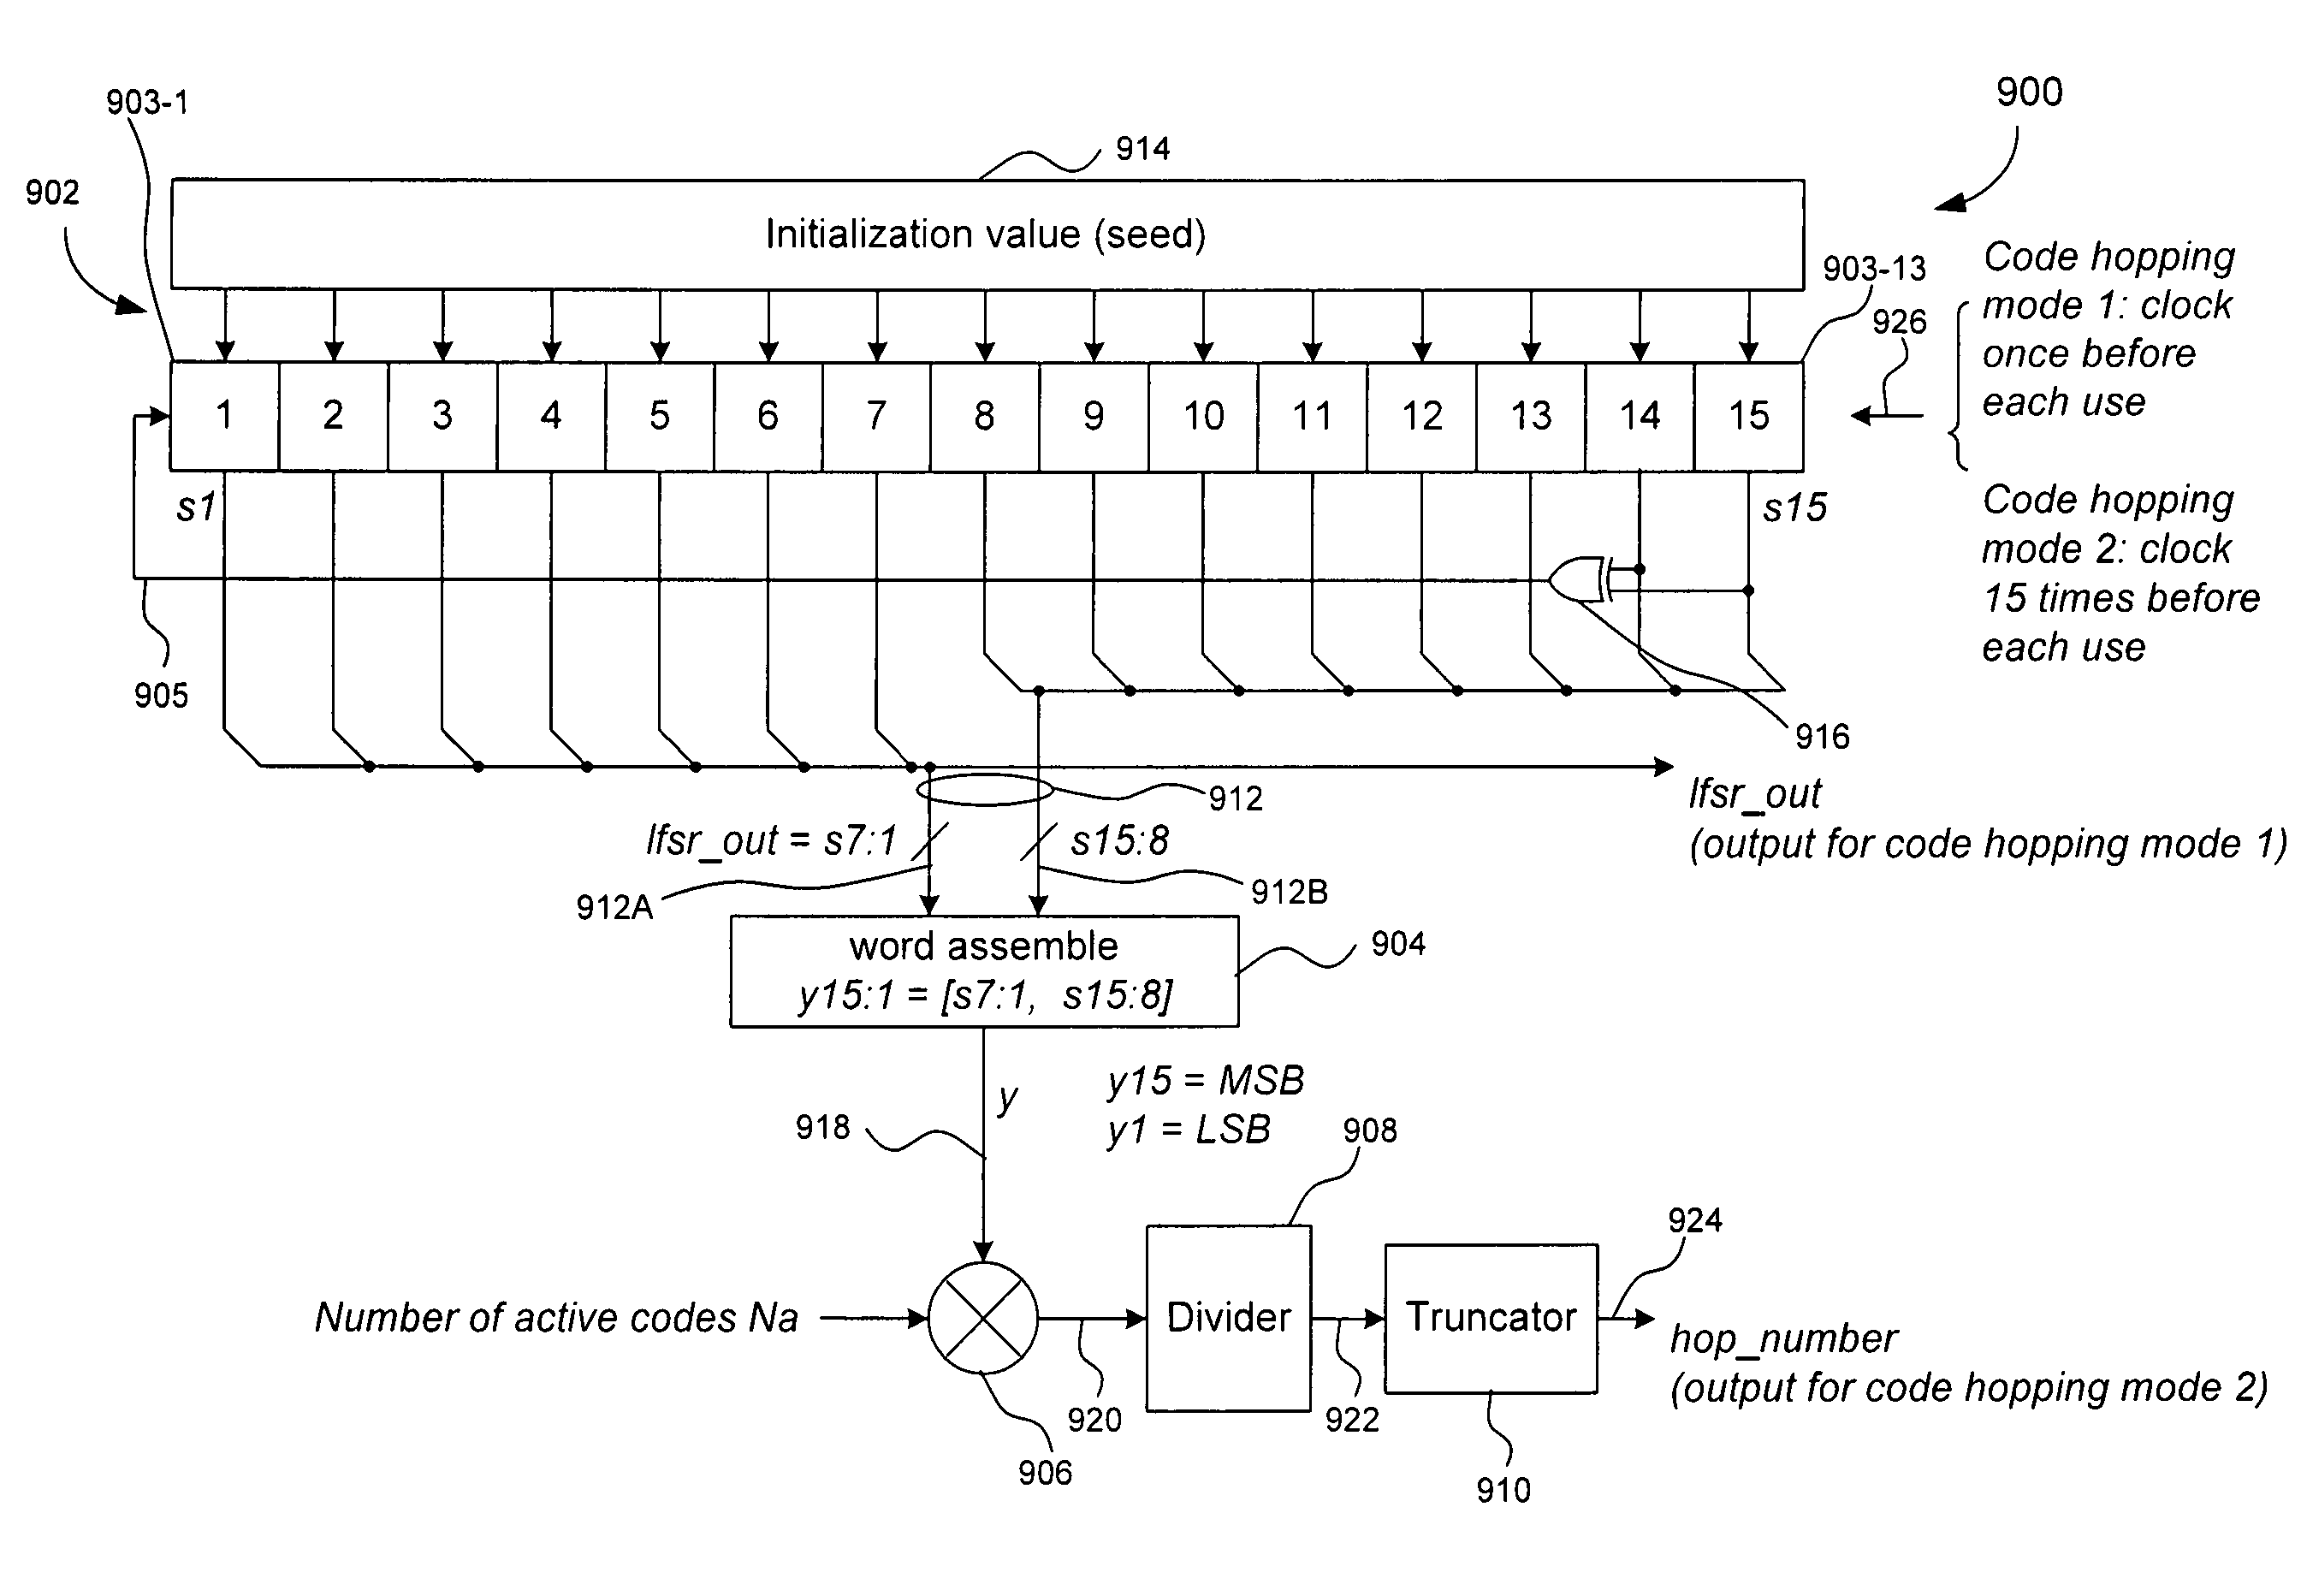 System and method of uncorrelated code hopping in a communications system